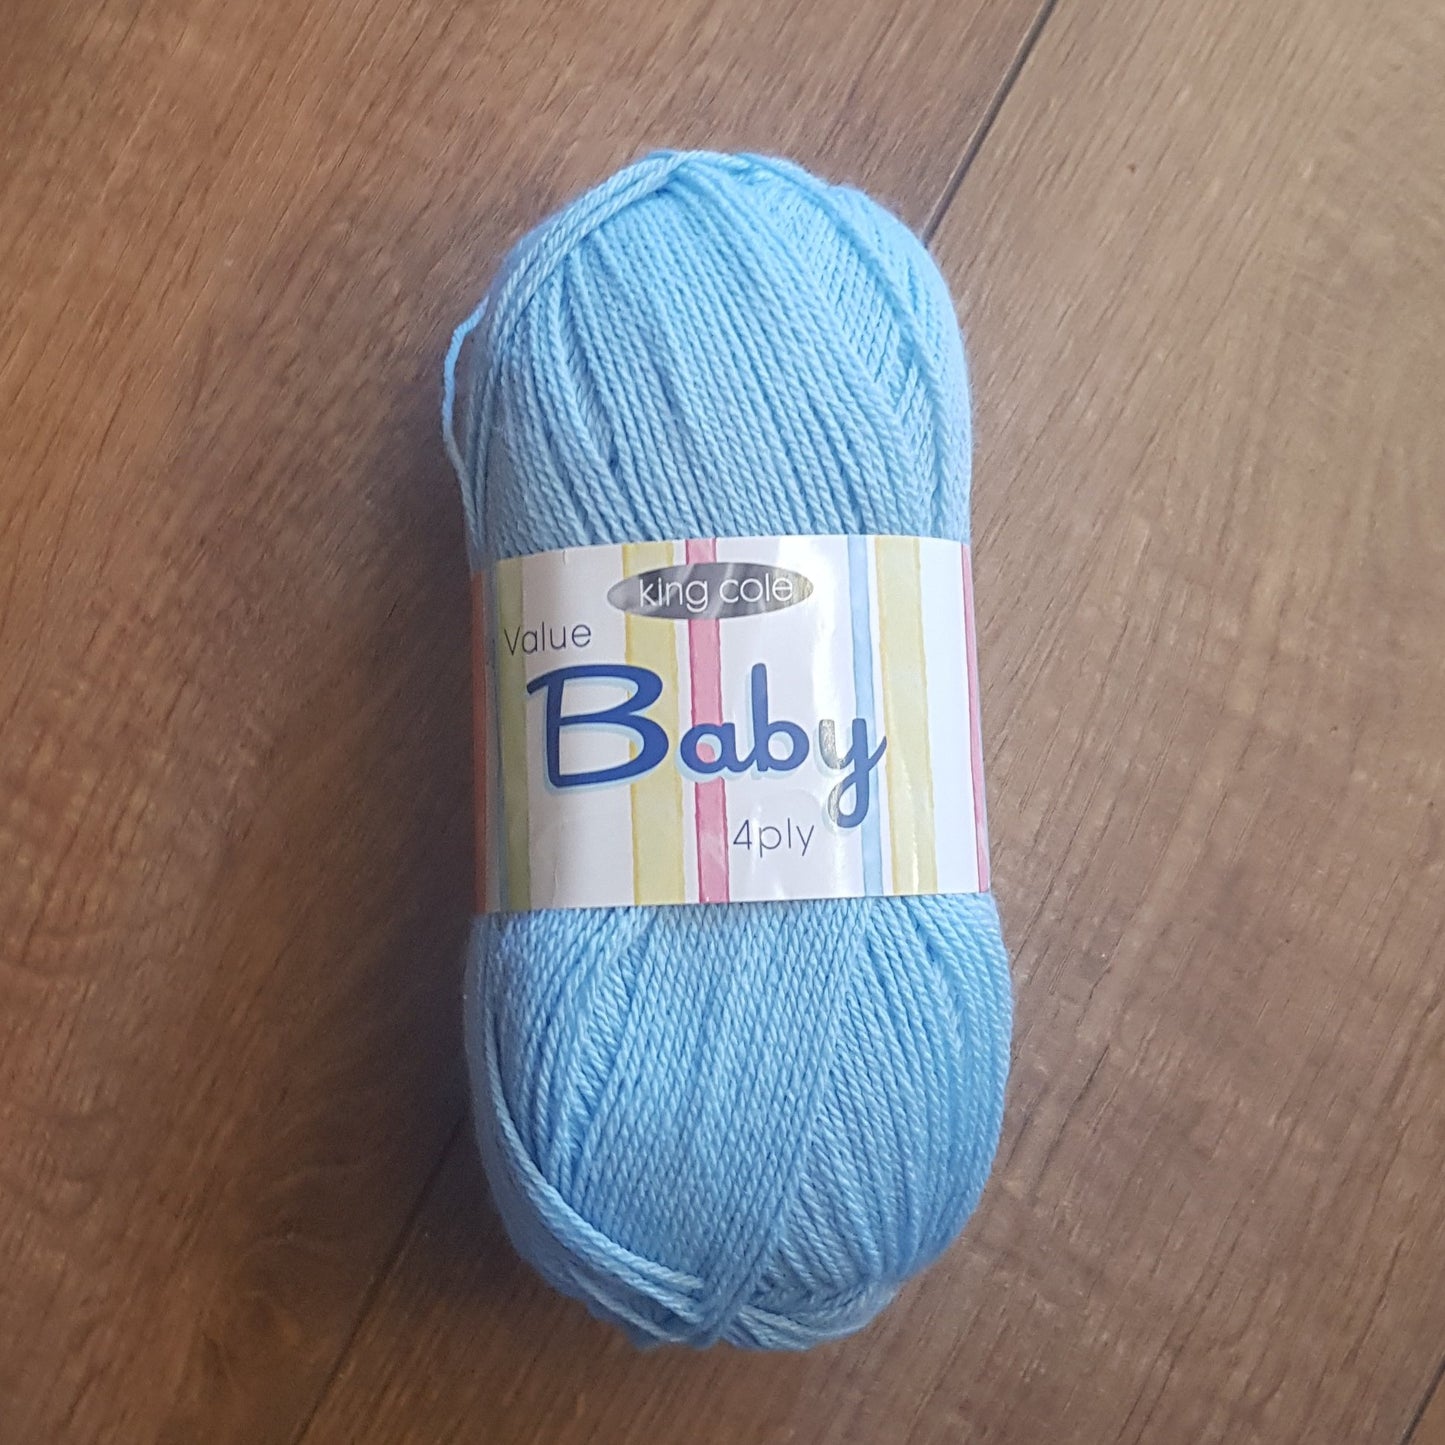 King Cole Big Value Baby 4ply Wool 100g - Various Shades